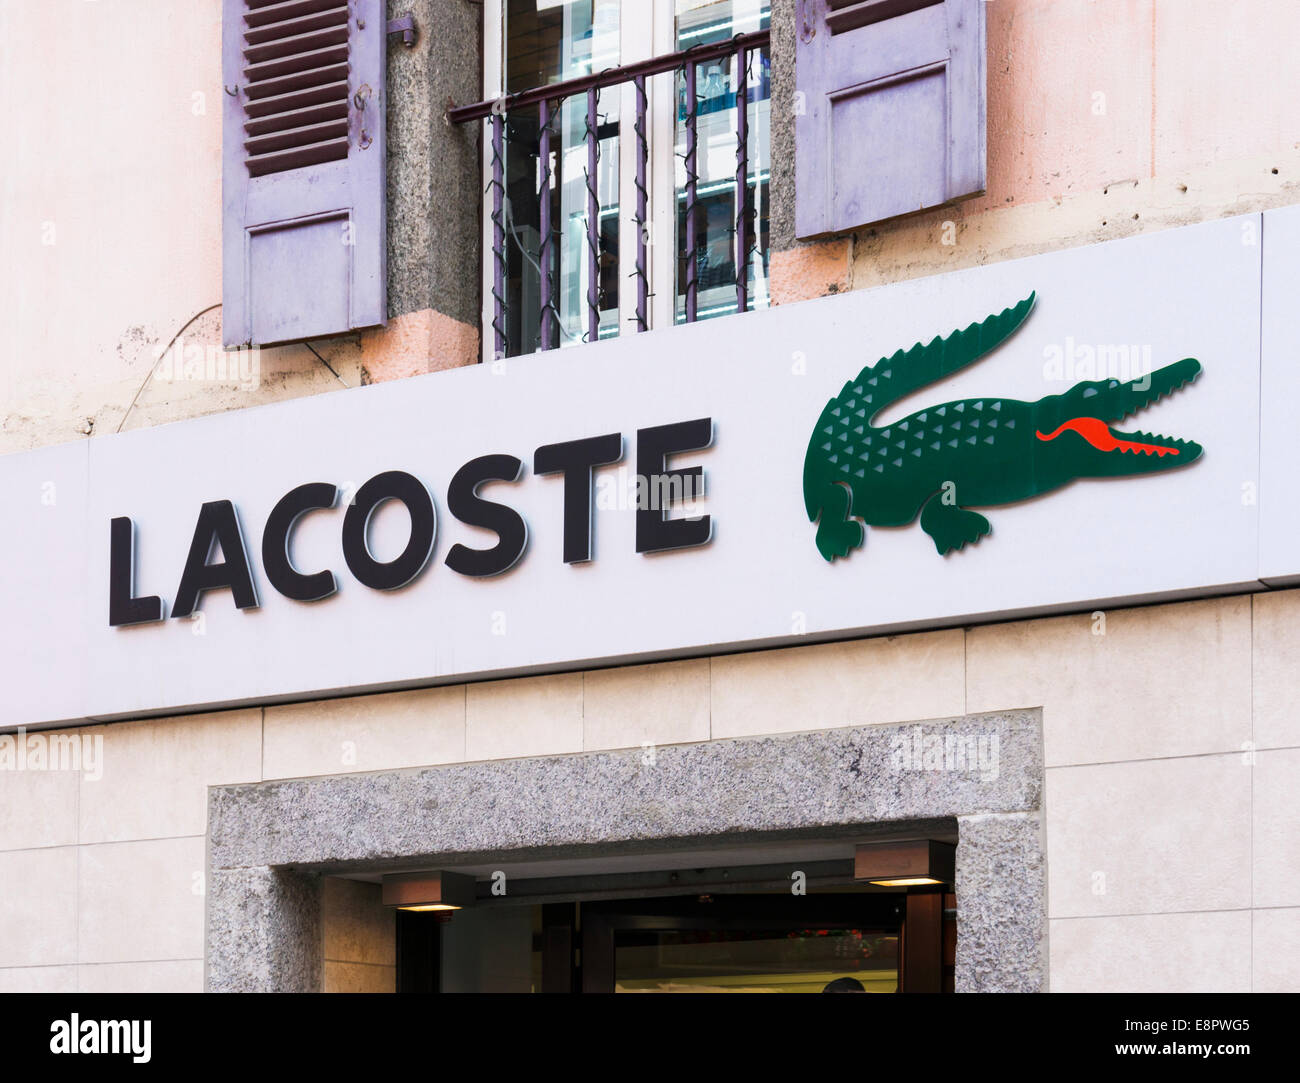 Lacoste store logo on a shop in France, Europe Stock Photo